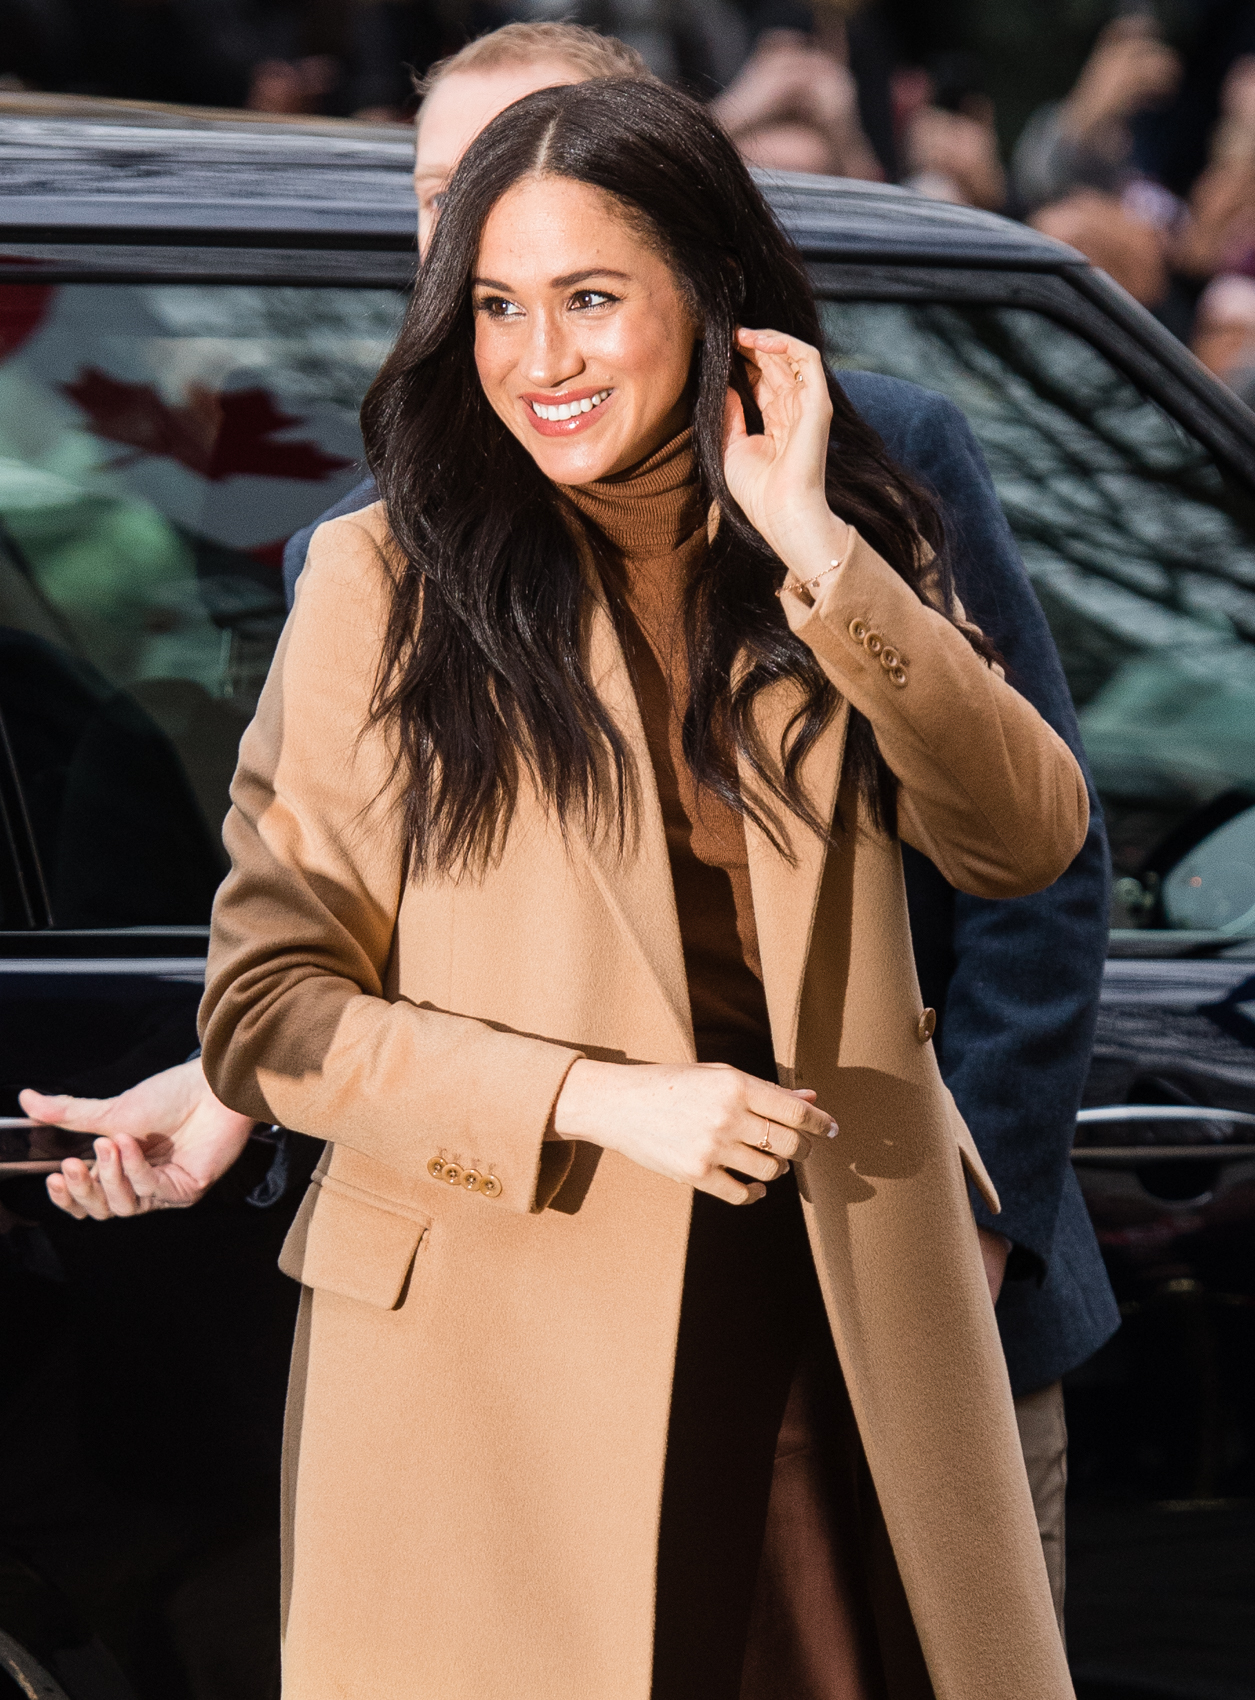 Meghan Markle Wears J Crew For Rare Public Outing